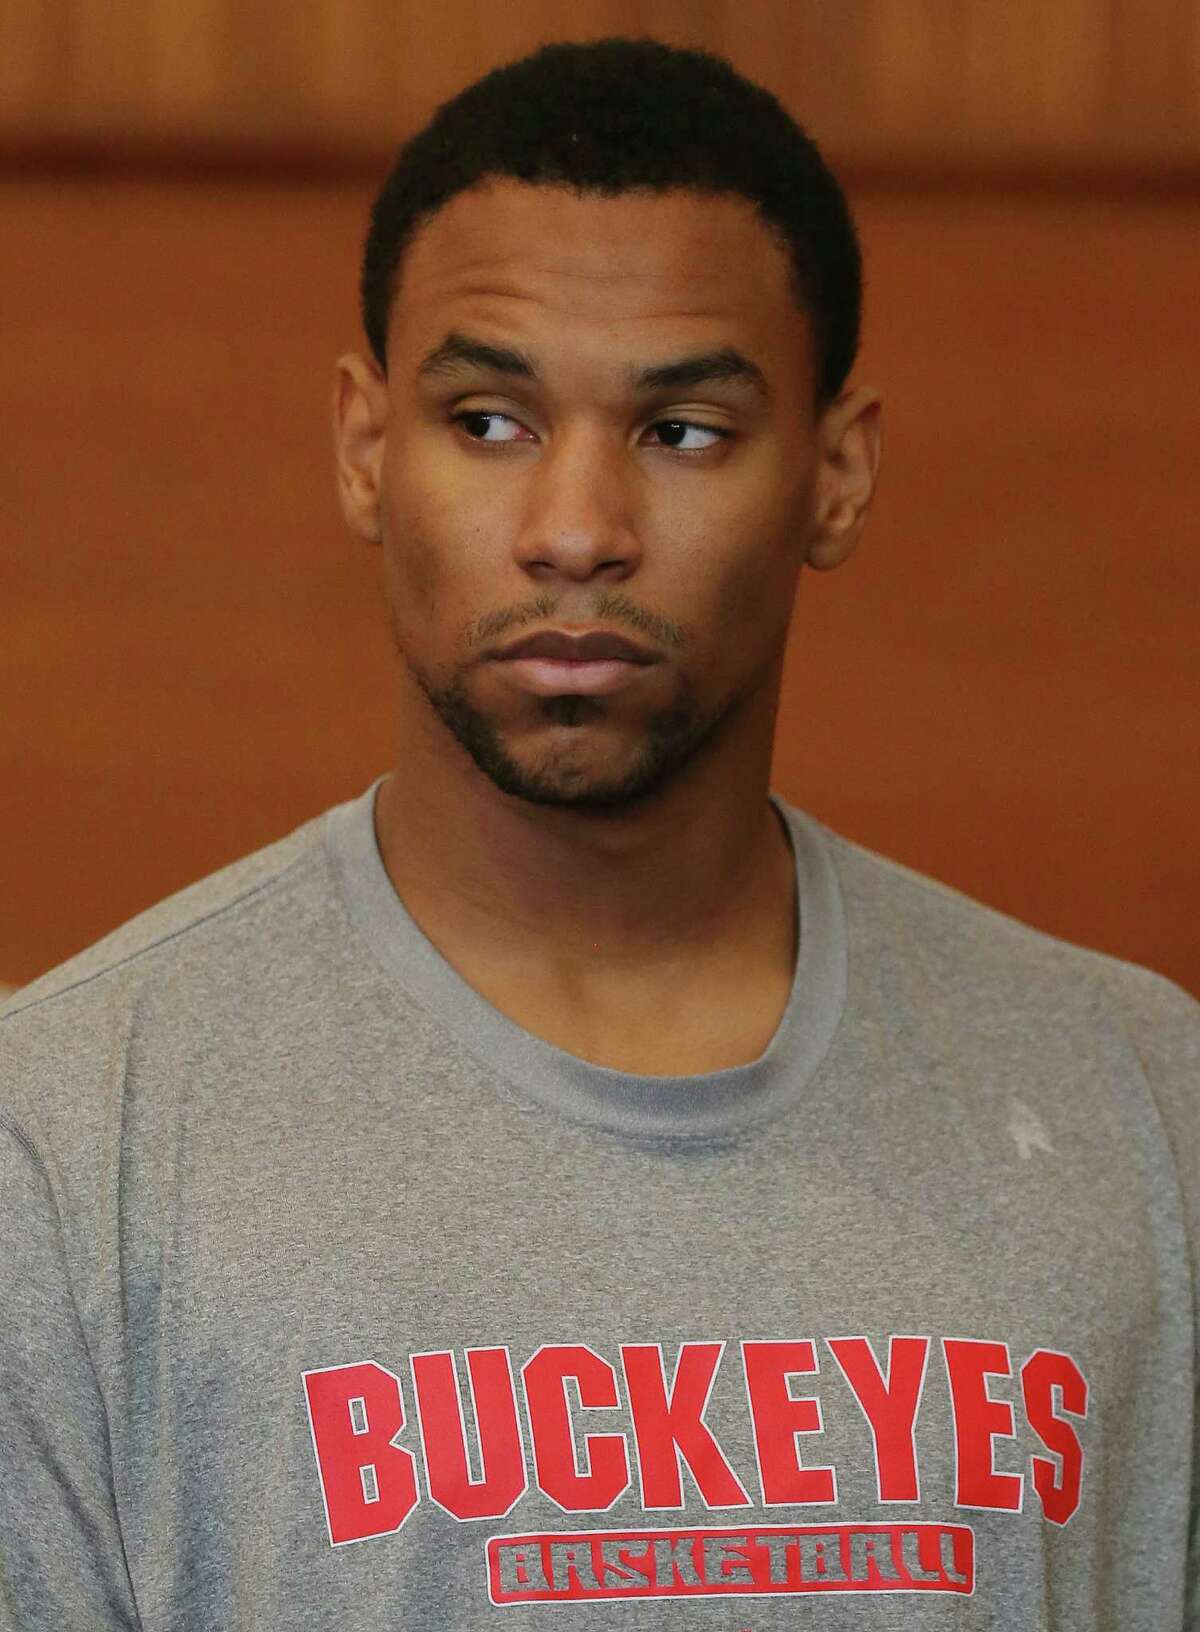 Celtics forward Jared Sullinger is accused of assaulting his girlfriend, who wants to drop the case.